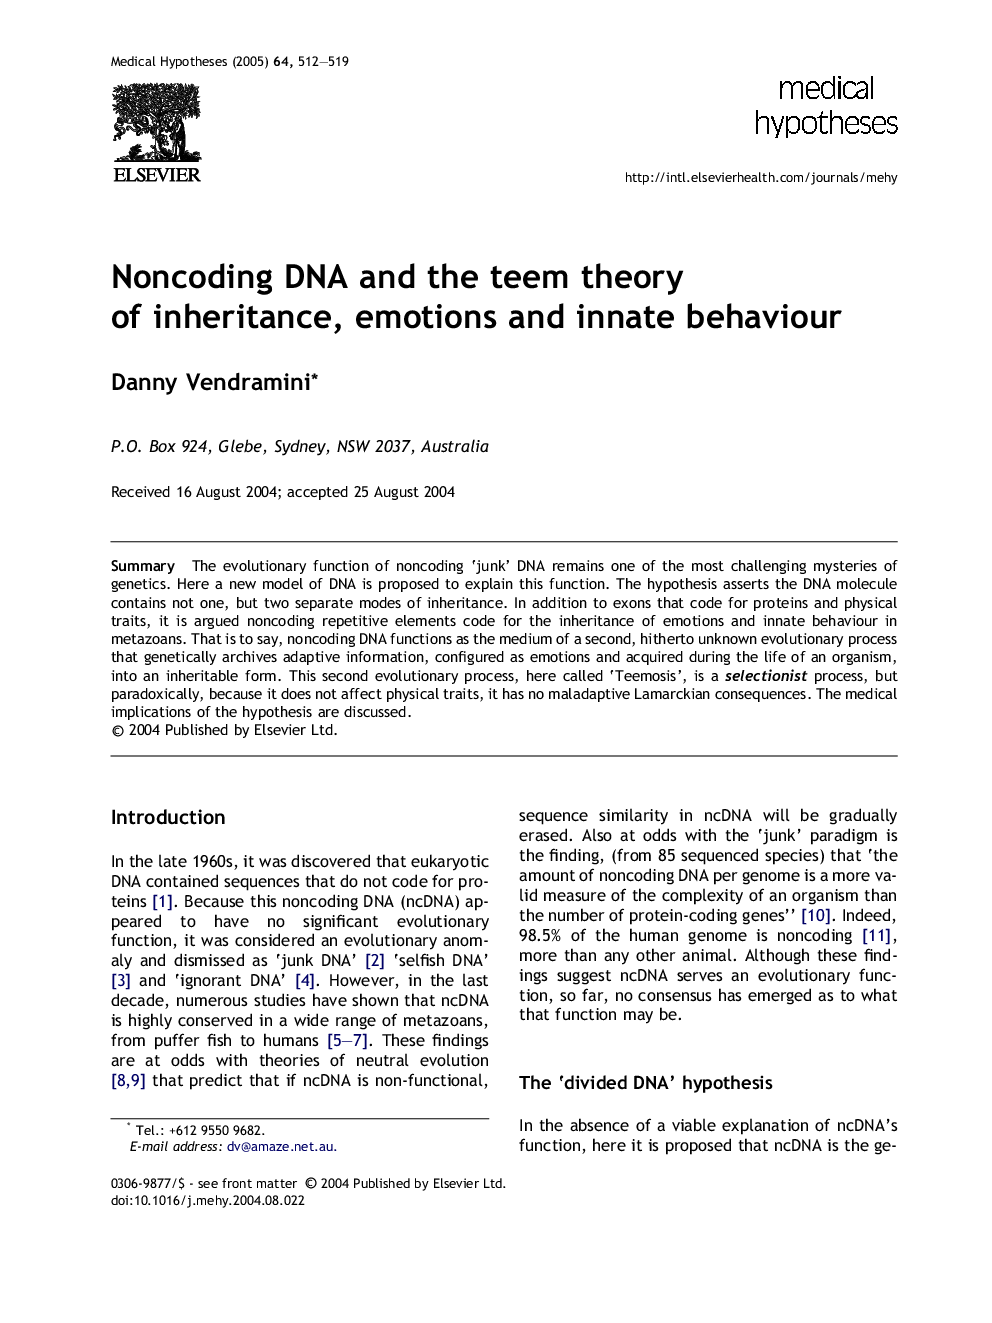 Noncoding DNA and the teem theory of inheritance, emotions and innate behaviour